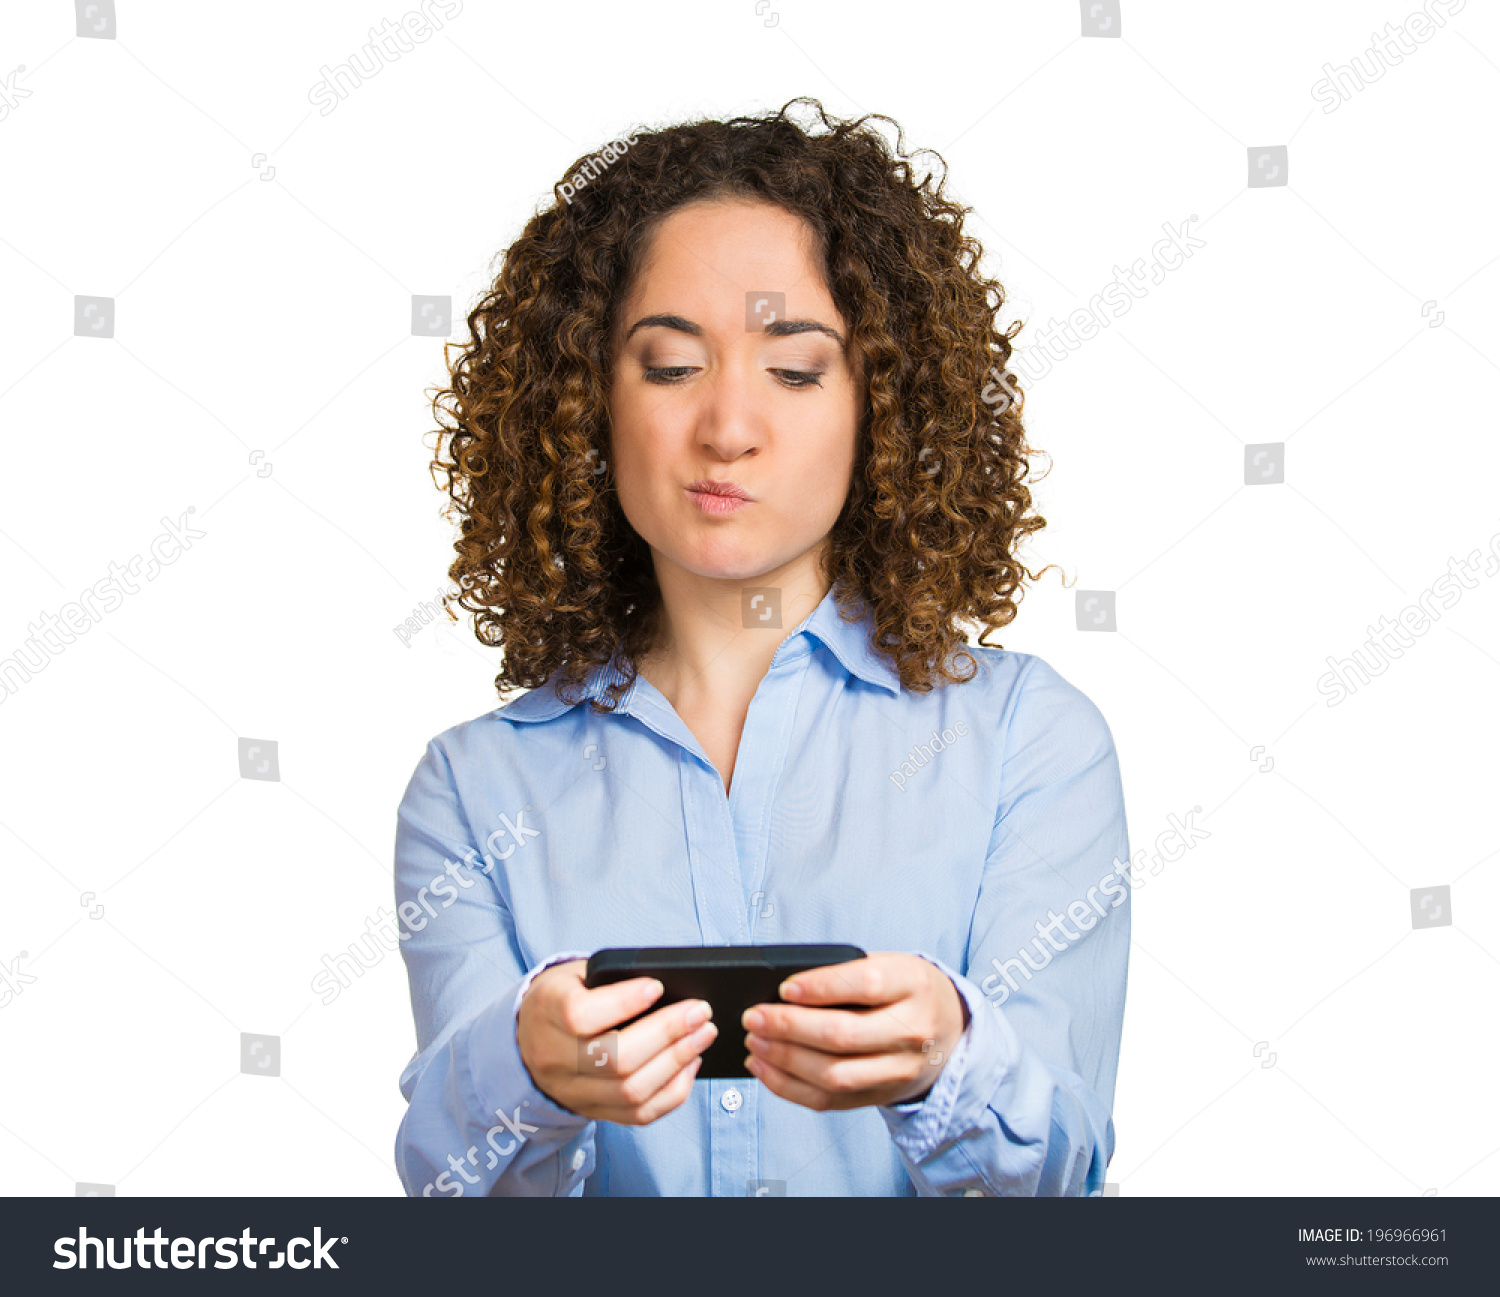 Closeup Portrait Young Angry Woman Unhappy Annoyed By Something Someone On Her Cell Phone 3094